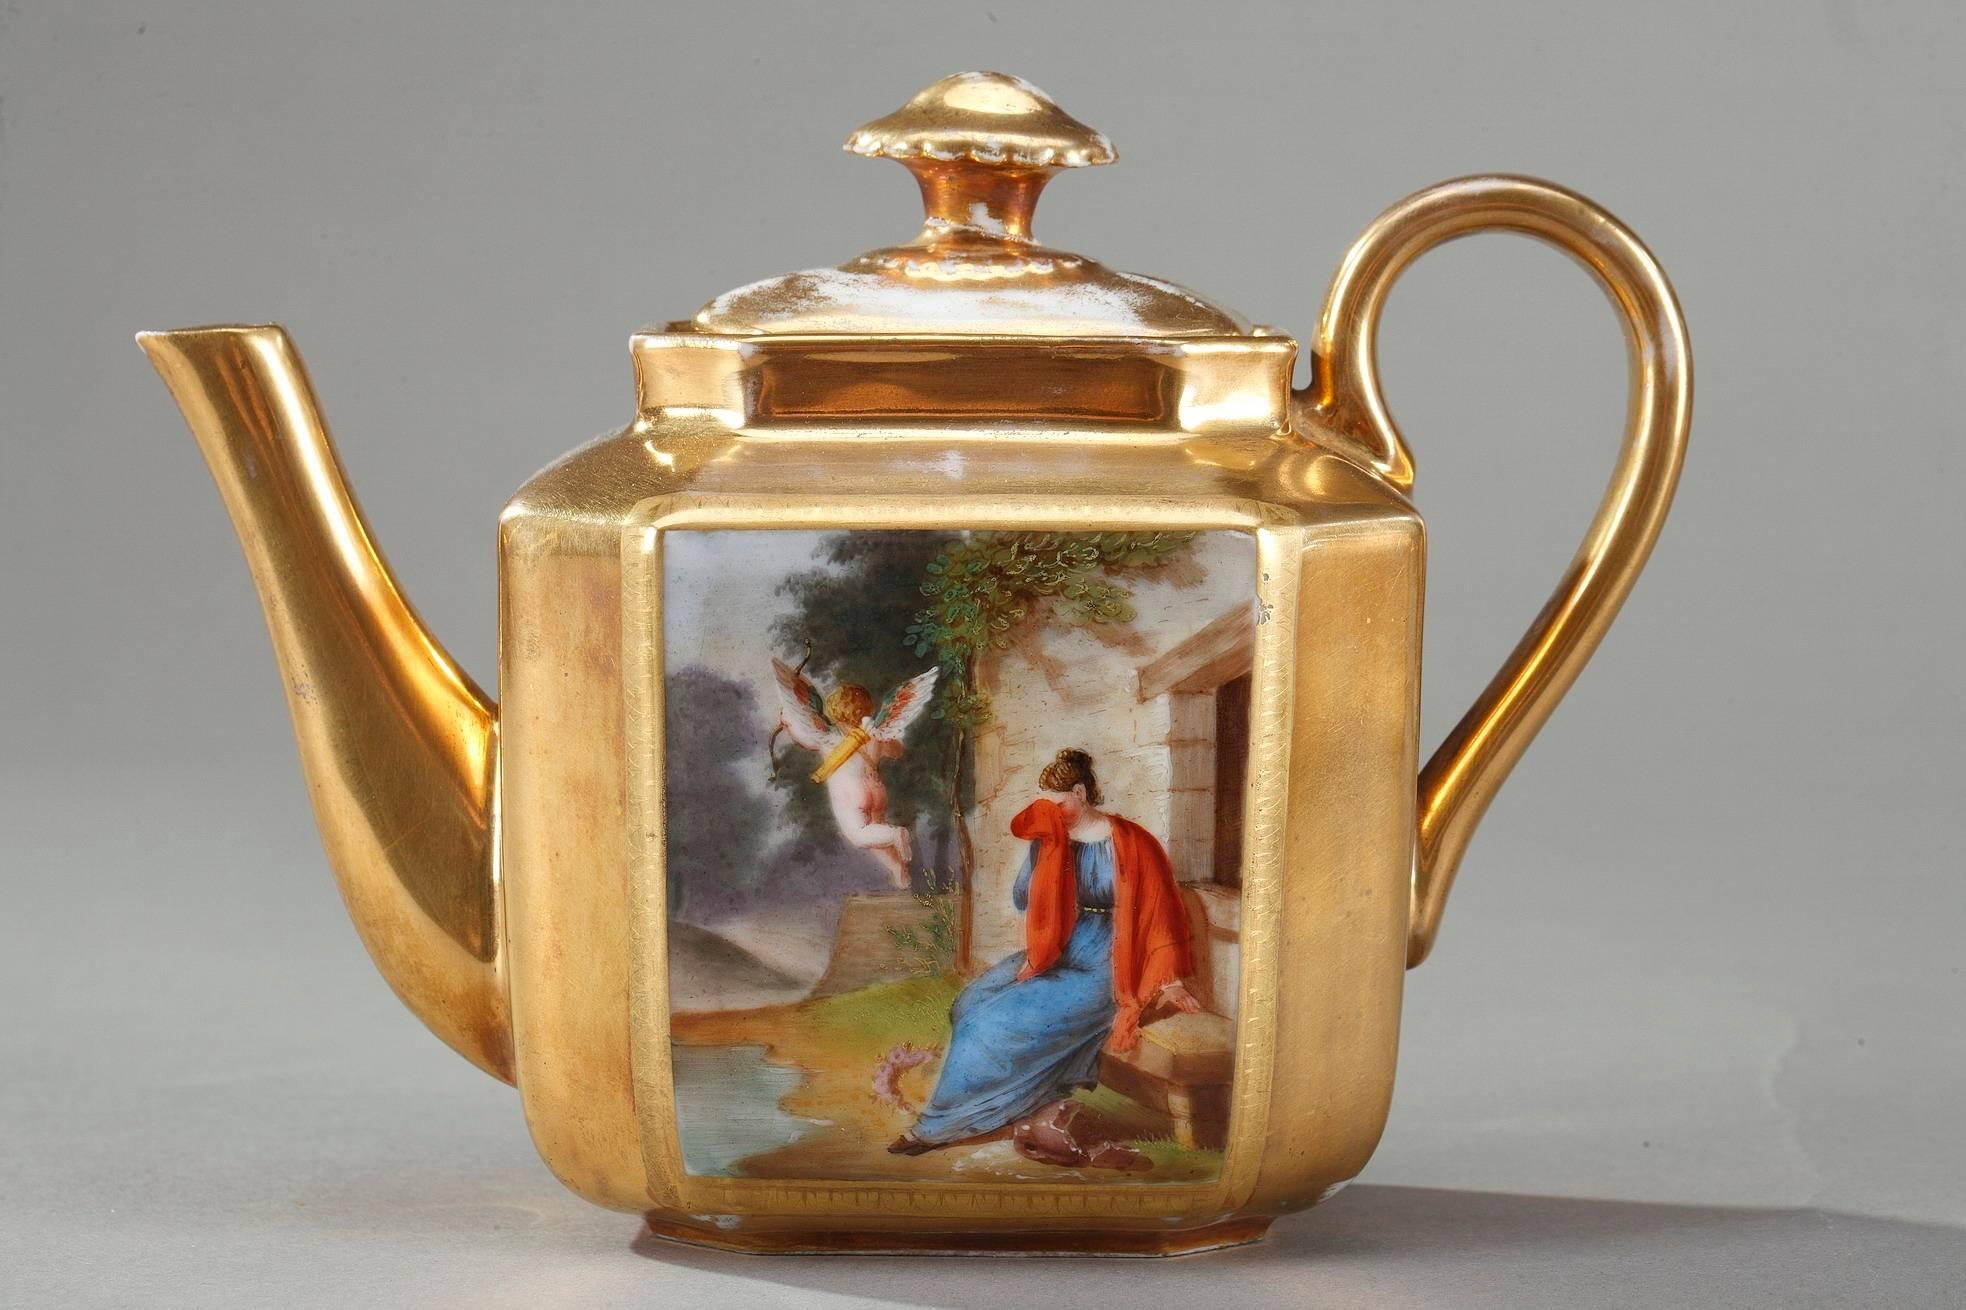 Empire Porcelain Coffee Service with Mythological Scenes 1